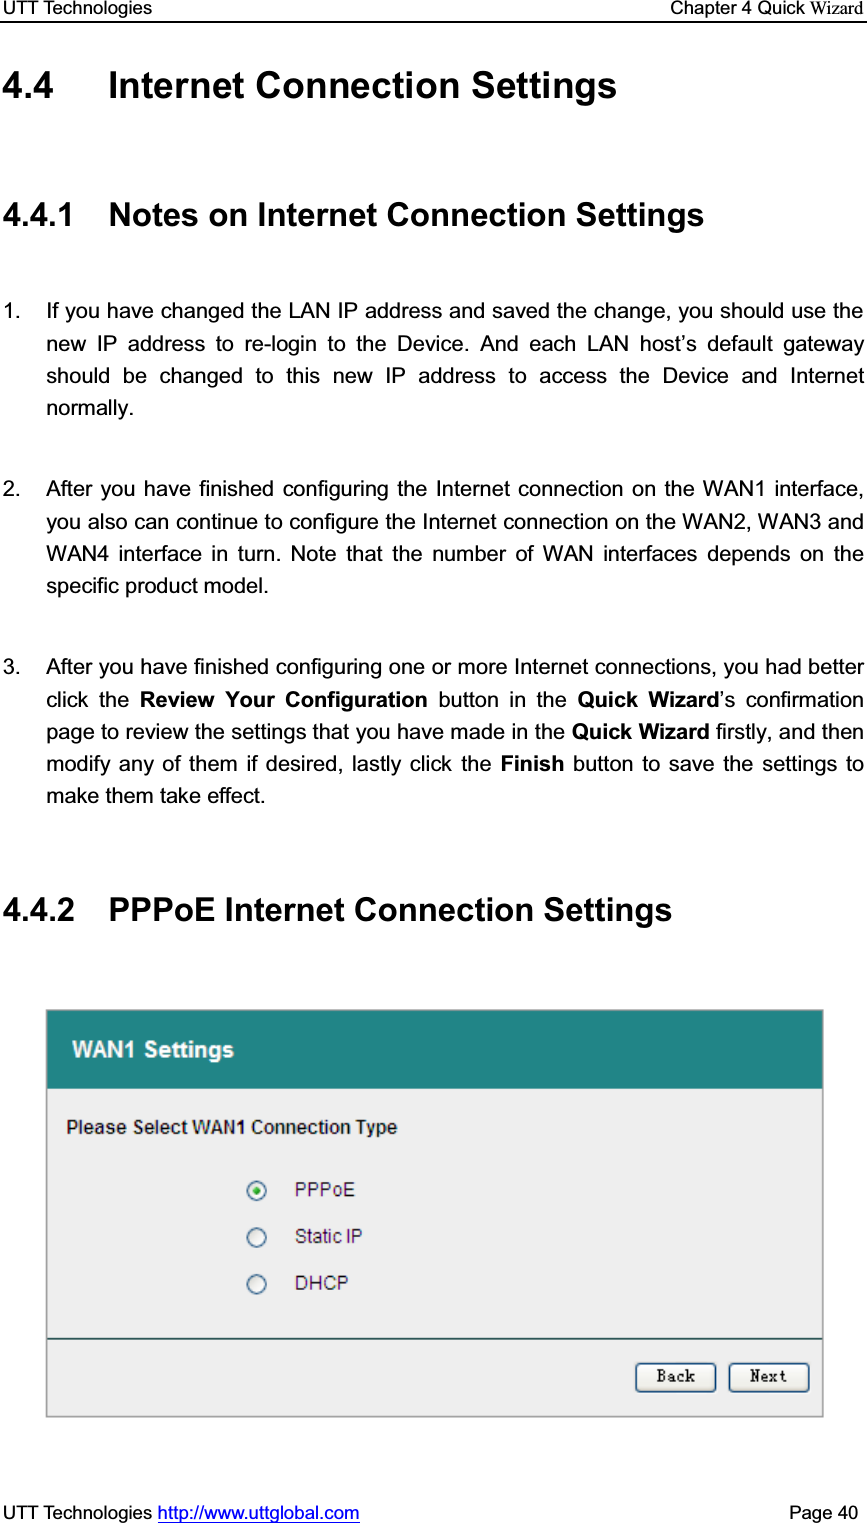 UTT Technologies    Chapter 4 Quick WizardUTT Technologies http://www.uttglobal.com                                              Page 40 4.4 Internet Connection Settings 4.4.1  Notes on Internet Connection Settings 1.  If you have changed the LAN IP address and saved the change, you should use the new IP address to re-login to the Device. And each LAN host¶s default gateway should be changed to this new IP address to access the Device and Internet normally. 2.  After you have finished configuring the Internet connection on the WAN1 interface, you also can continue to configure the Internet connection on the WAN2, WAN3 and WAN4 interface in turn. Note that the number of WAN interfaces depends on the specific product model. 3.  After you have finished configuring one or more Internet connections, you had better click the Review Your Configuration button in the Quick Wizard¶s confirmation page to review the settings that you have made in the Quick Wizard firstly, and then modify any of them if desired, lastly click the Finish button to save the settings to make them take effect.   4.4.2 PPPoE Internet Connection Settings 